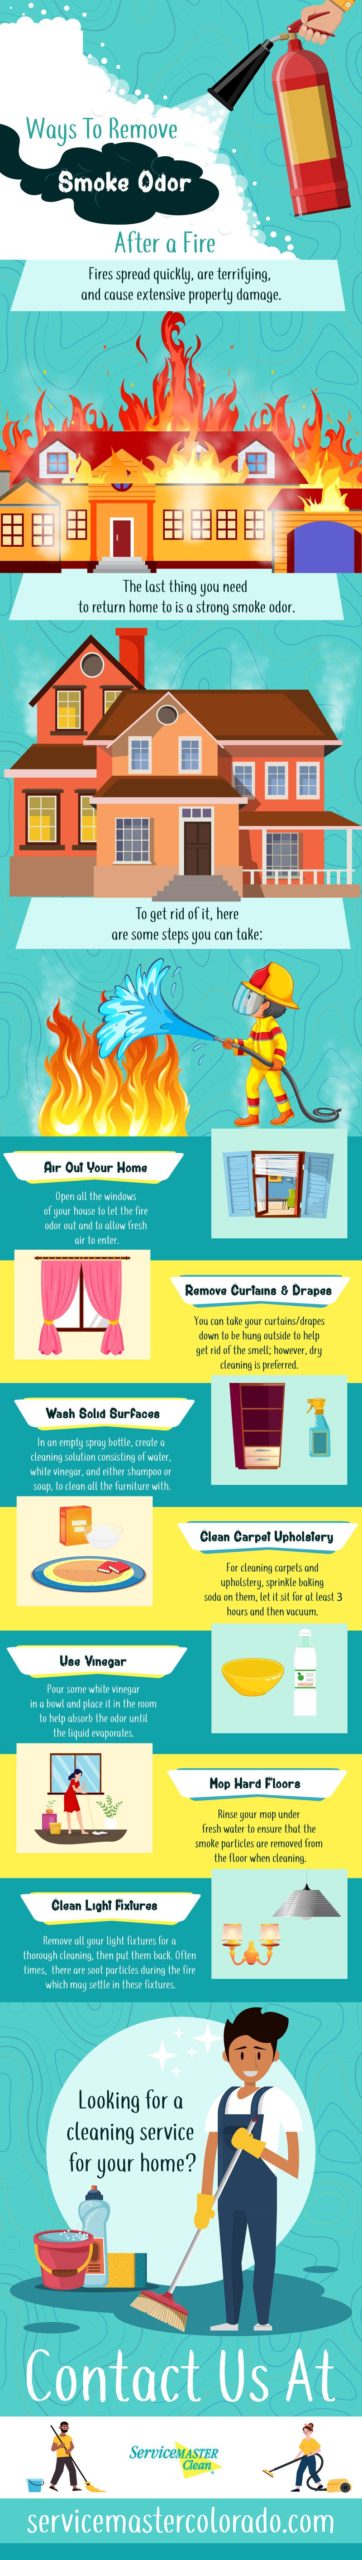 Ways To Remove Smoke Odor After A Fire